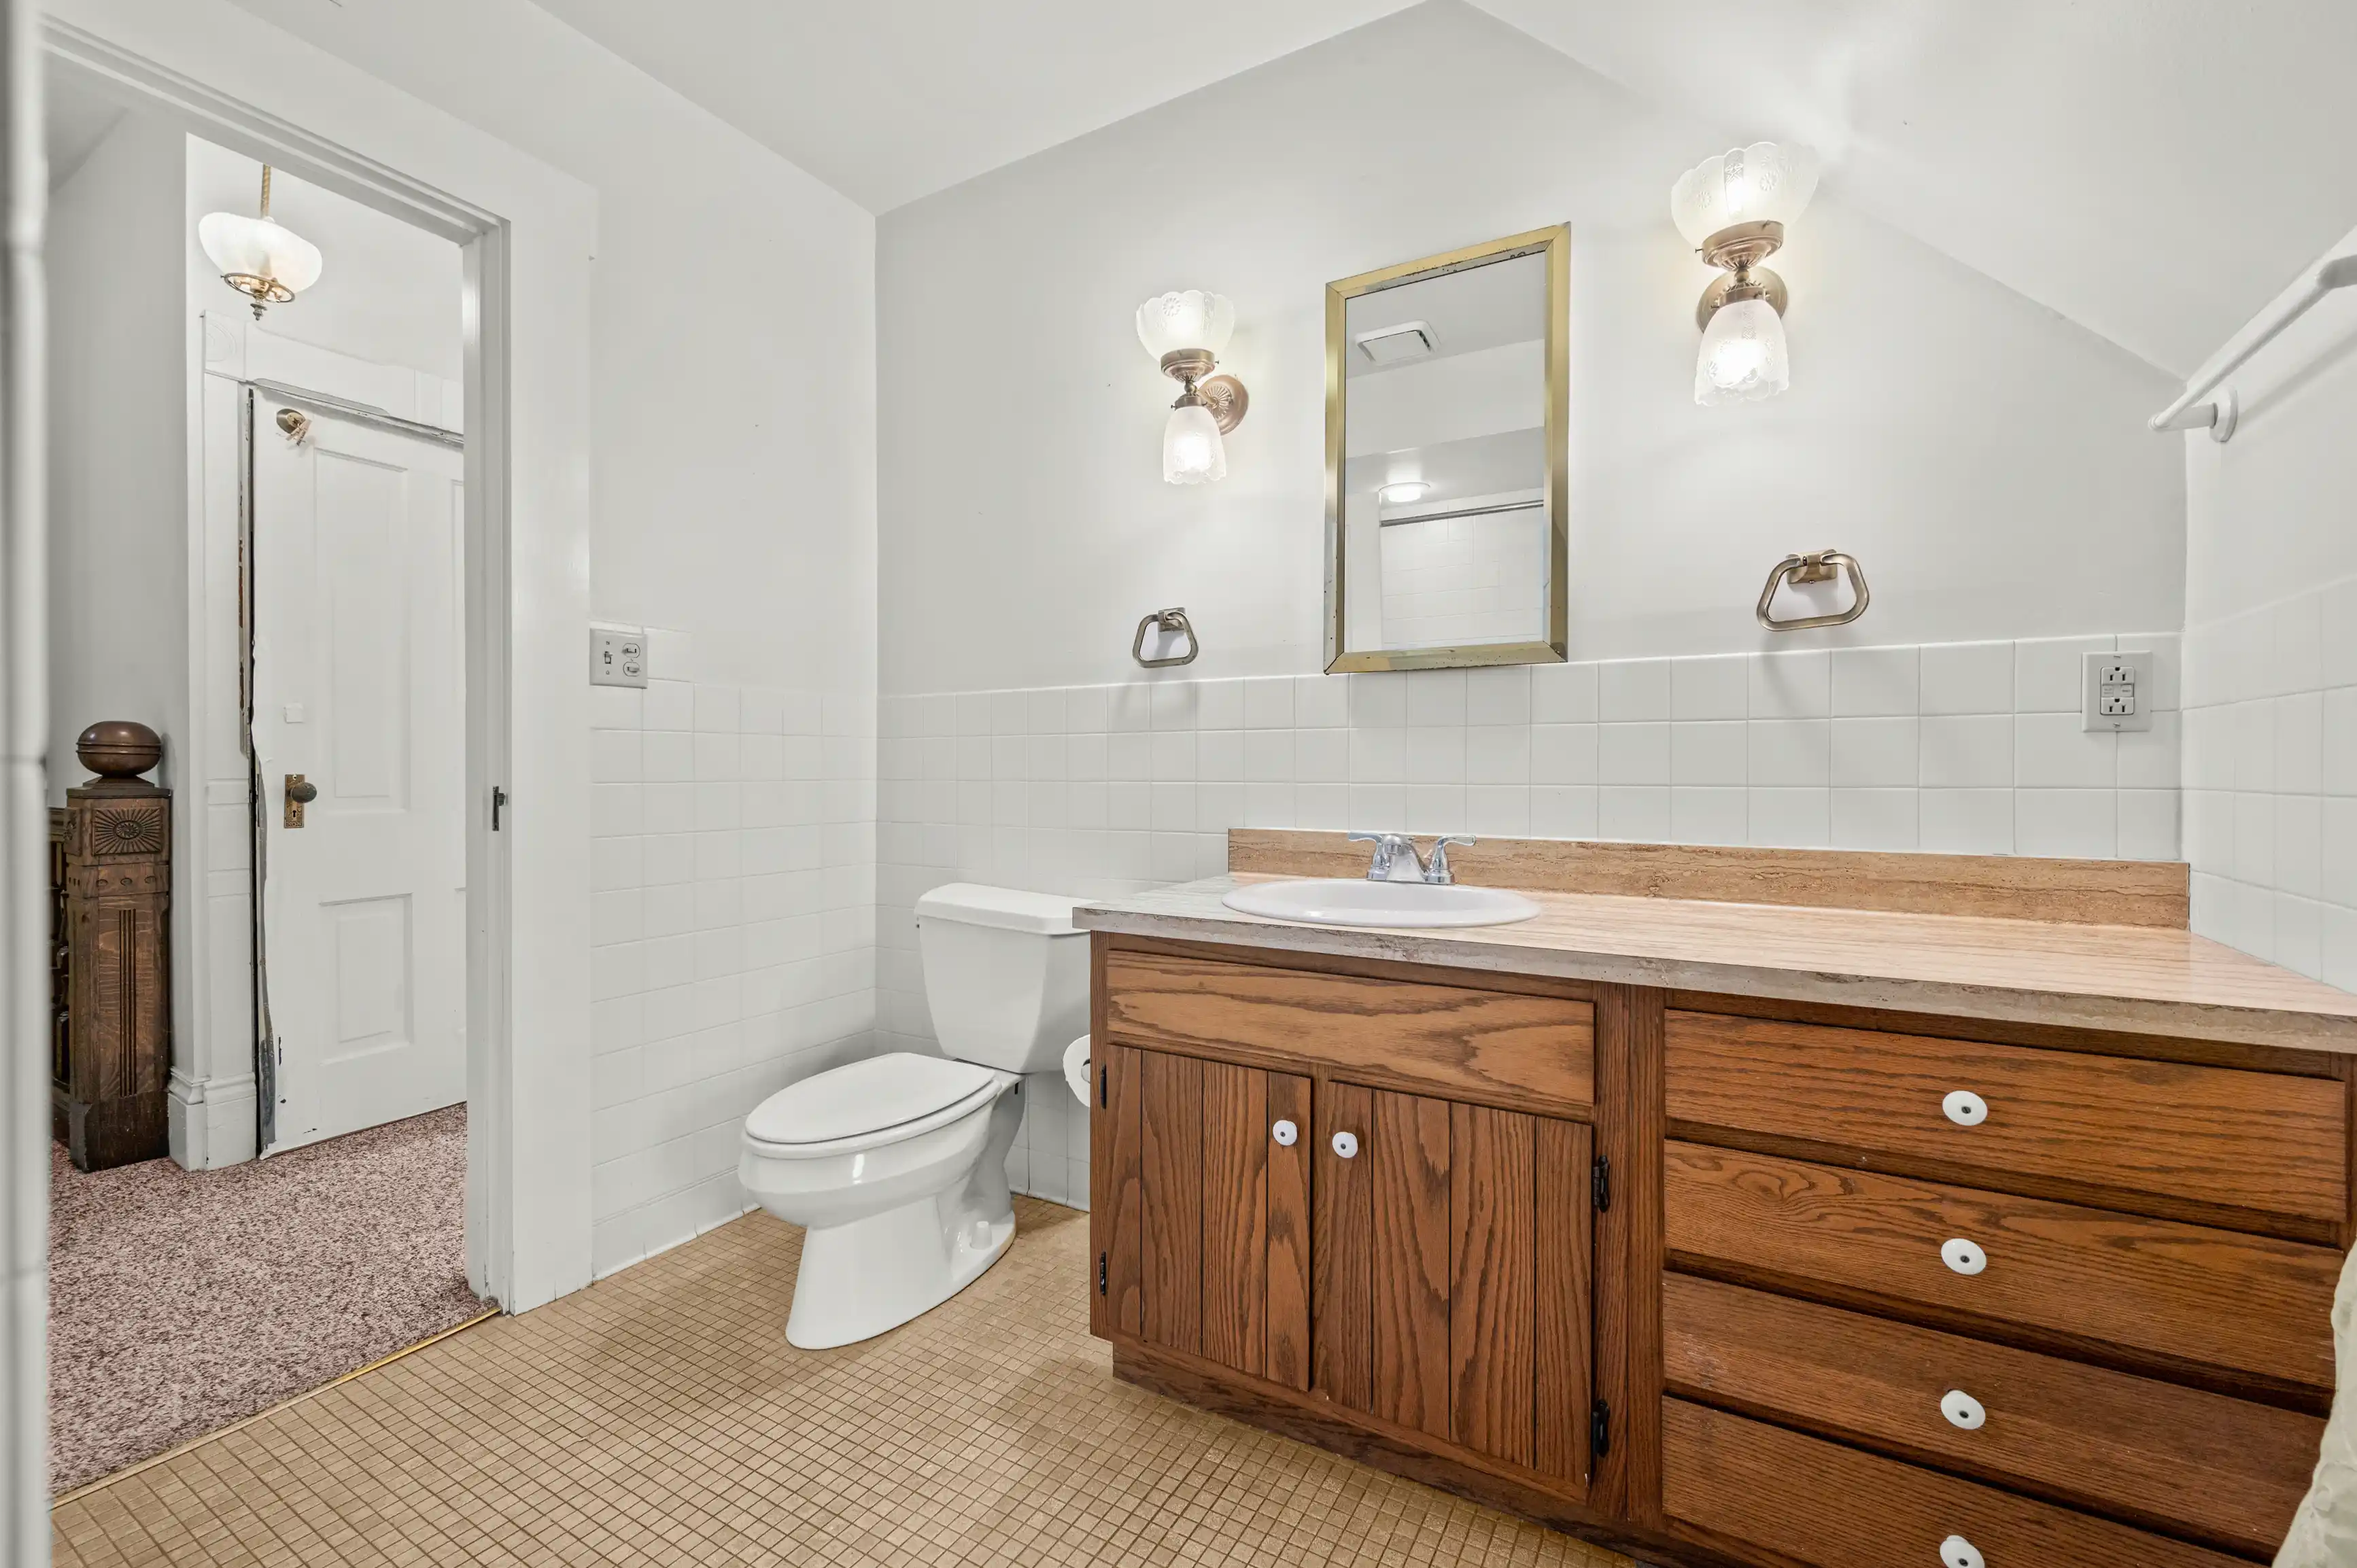 A bright and clean bathroom with white walls and tile, featuring a wooden vanity with white sink, wall mirror, toilet, tiled floor, and a light fixture above the mirror.